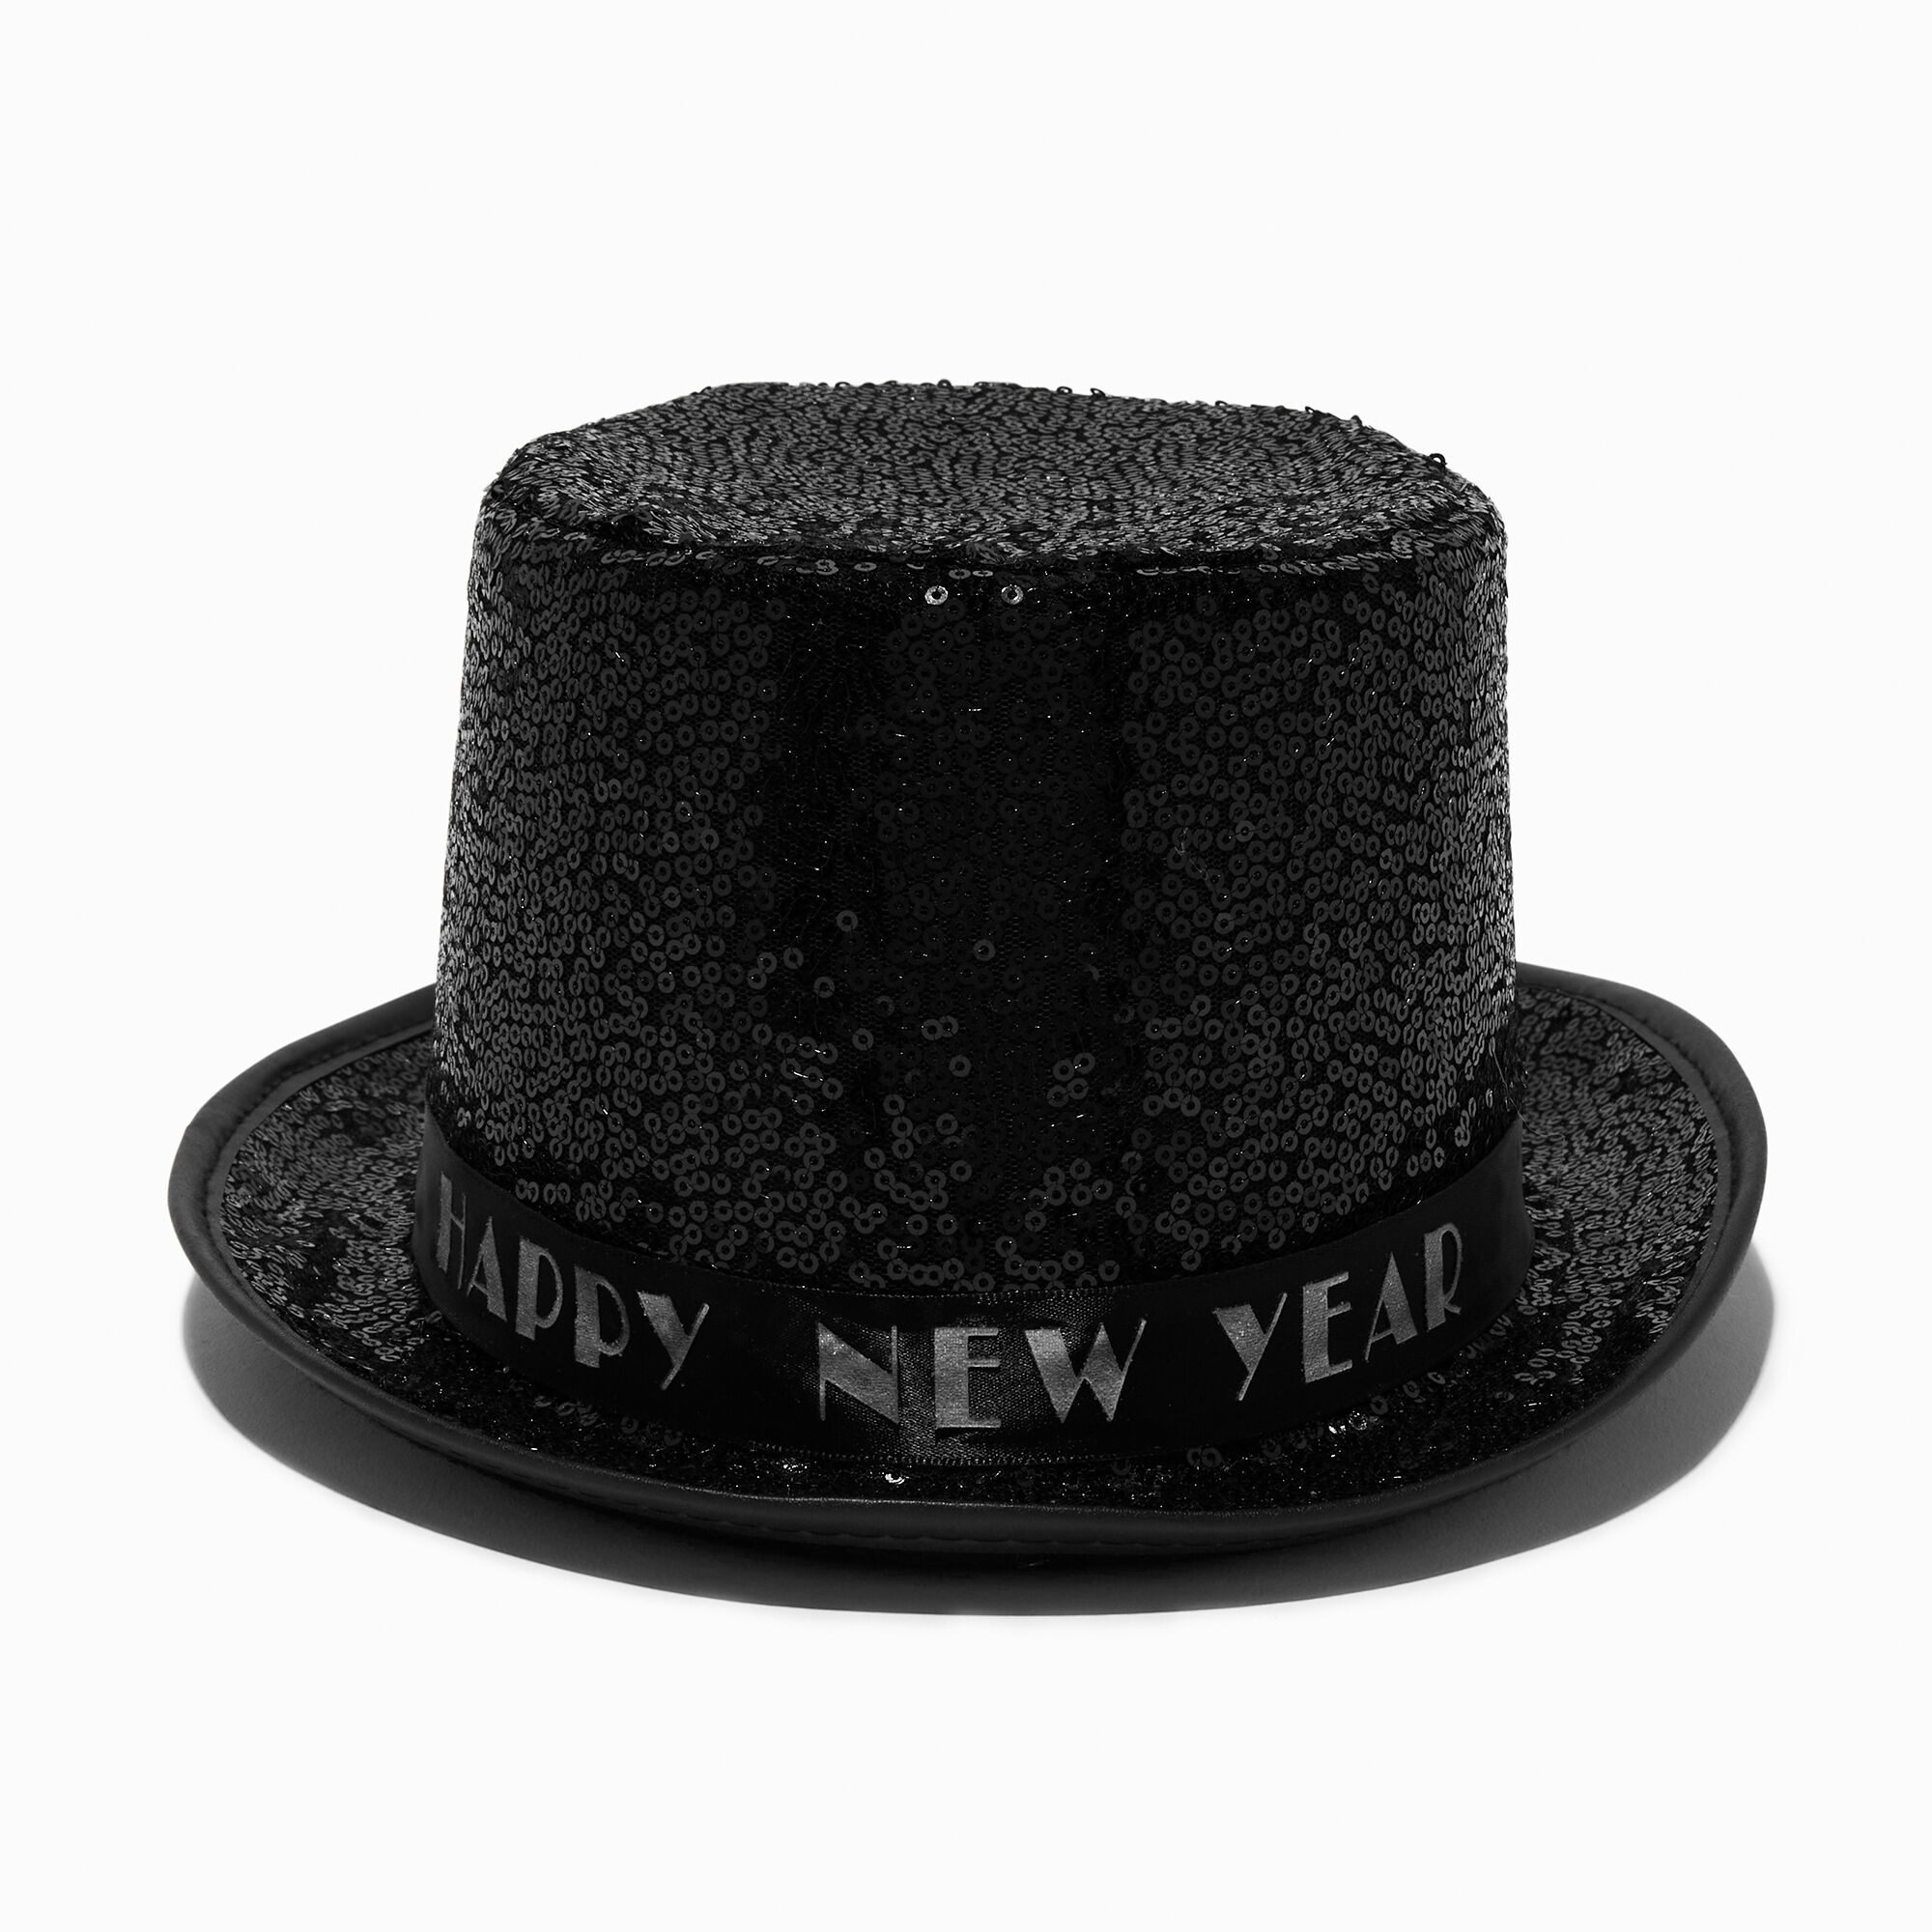 View Claires happy New Year Sequin Top Hat Black information